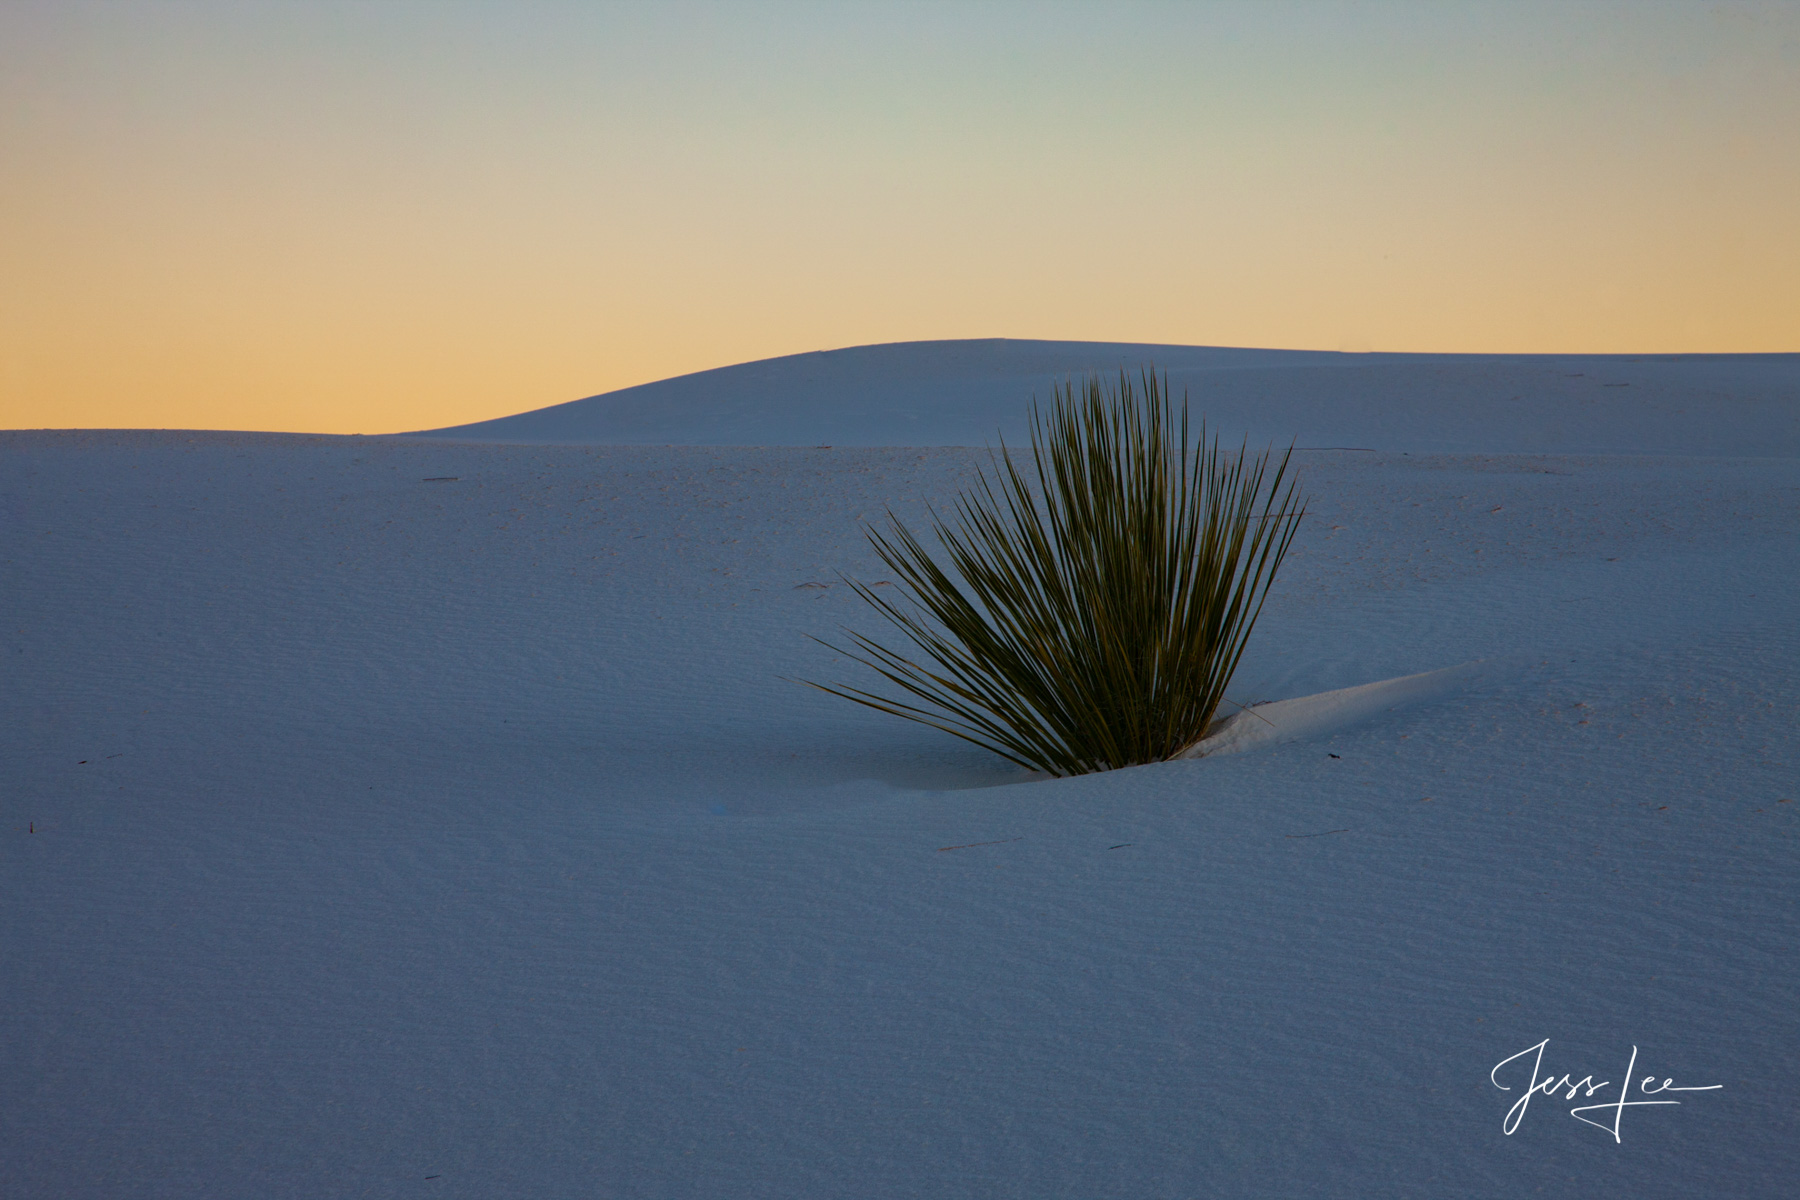 Limited Edition of 50 Exclusive high-resolution Museum Quality Fine Art Prints of Desert dunes Photos copyright © Jess Lee